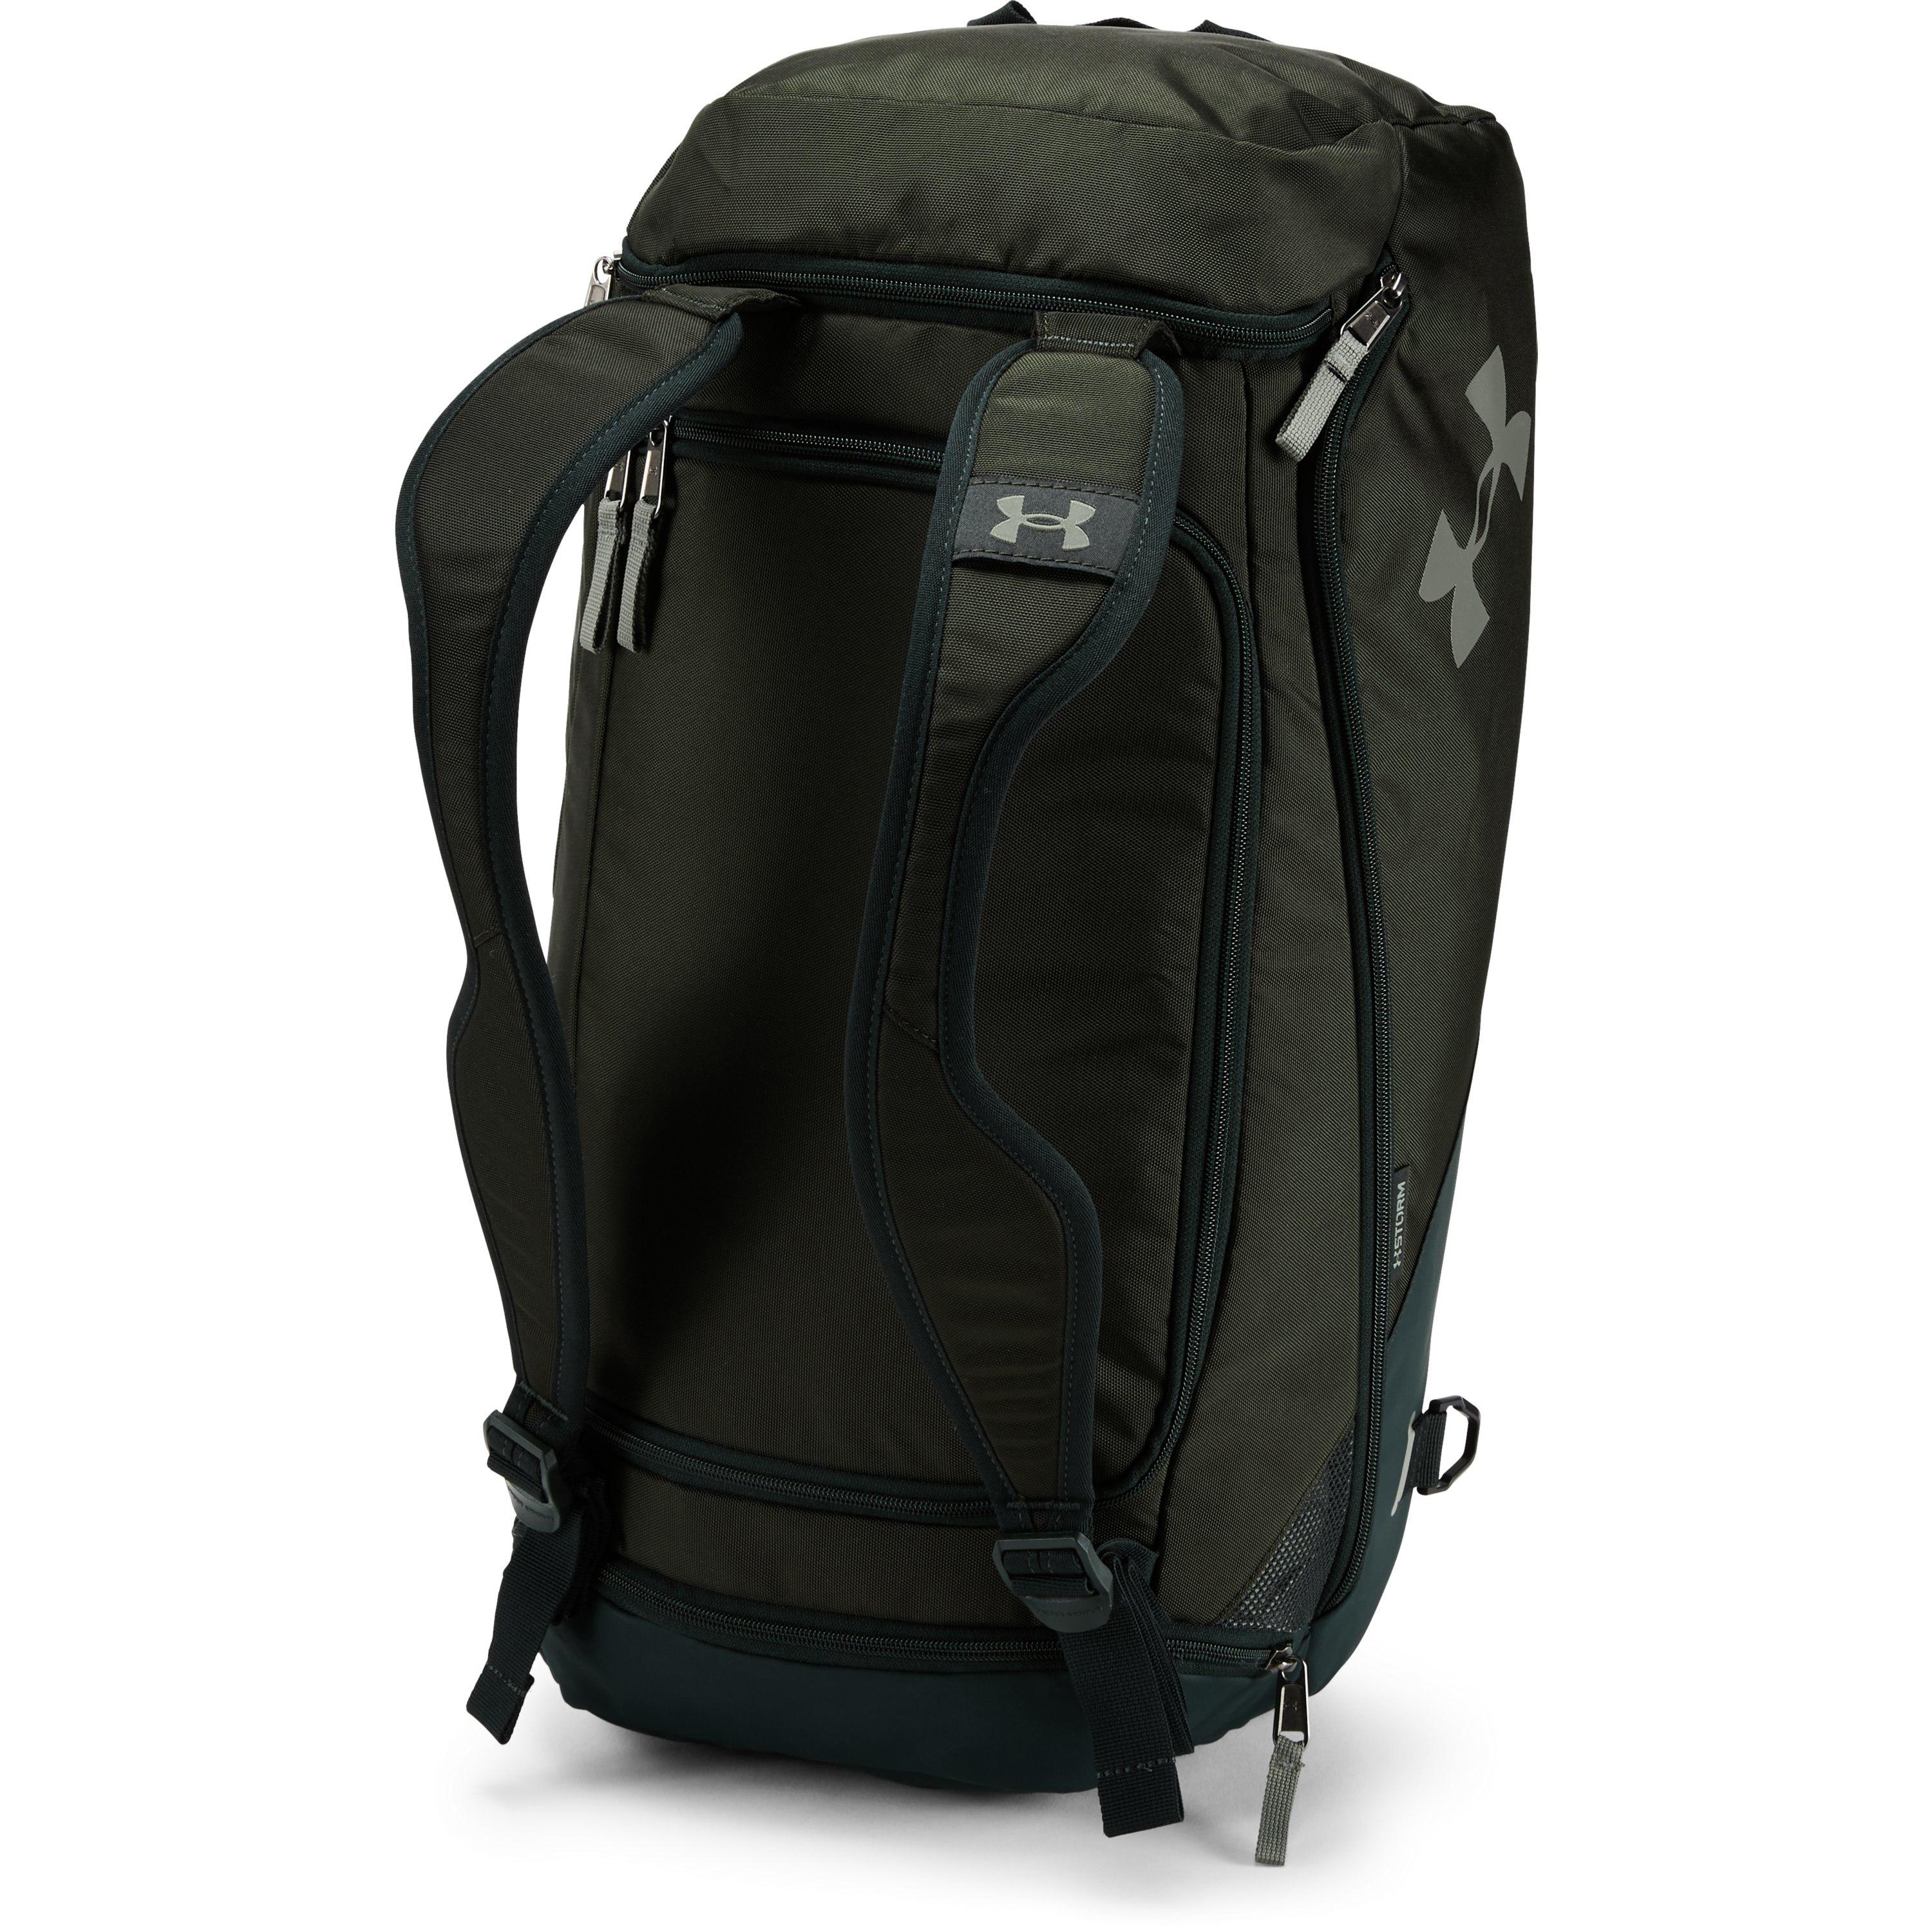 Under Armour Contain Duo Backpack Duffle Sale, SAVE 60%.